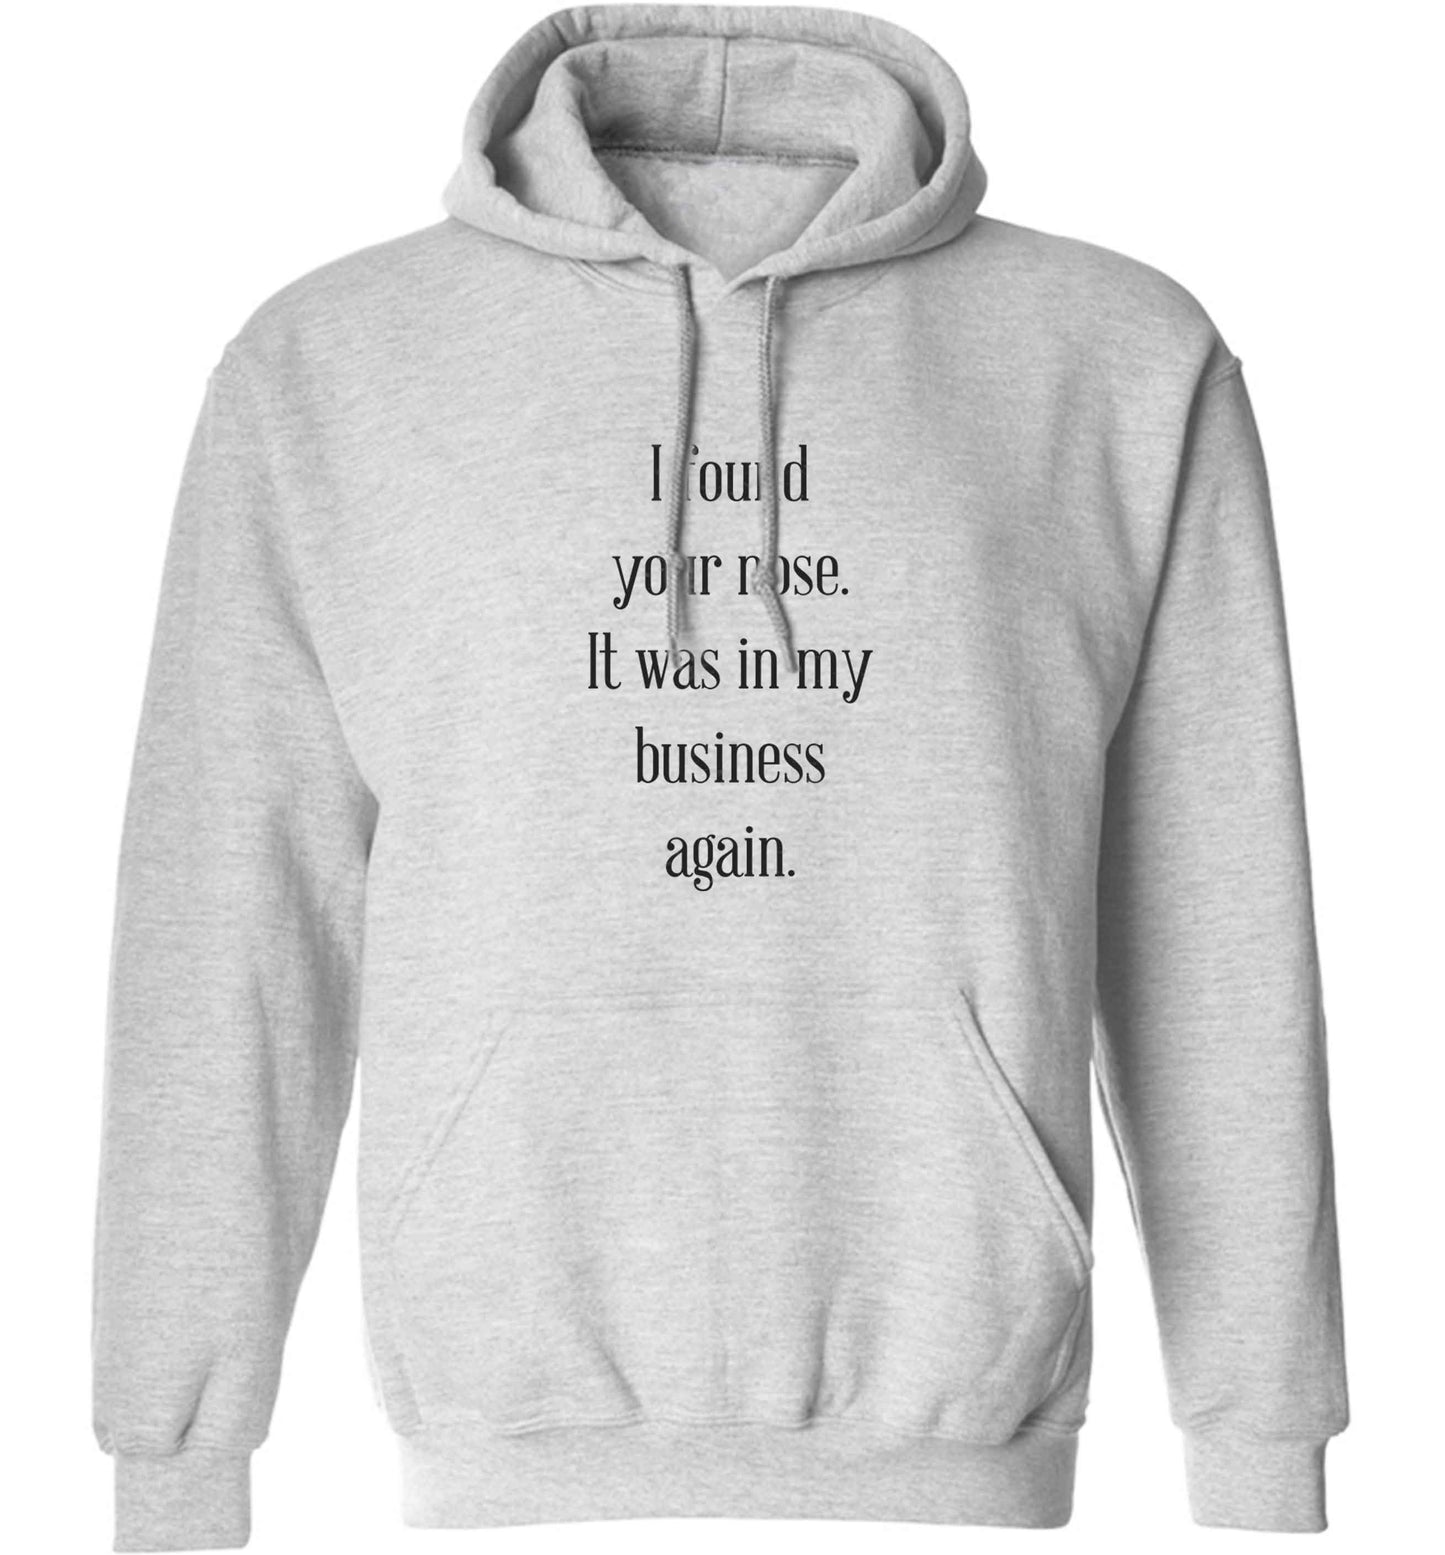 I found your nose it was in my business again adults unisex grey hoodie 2XL